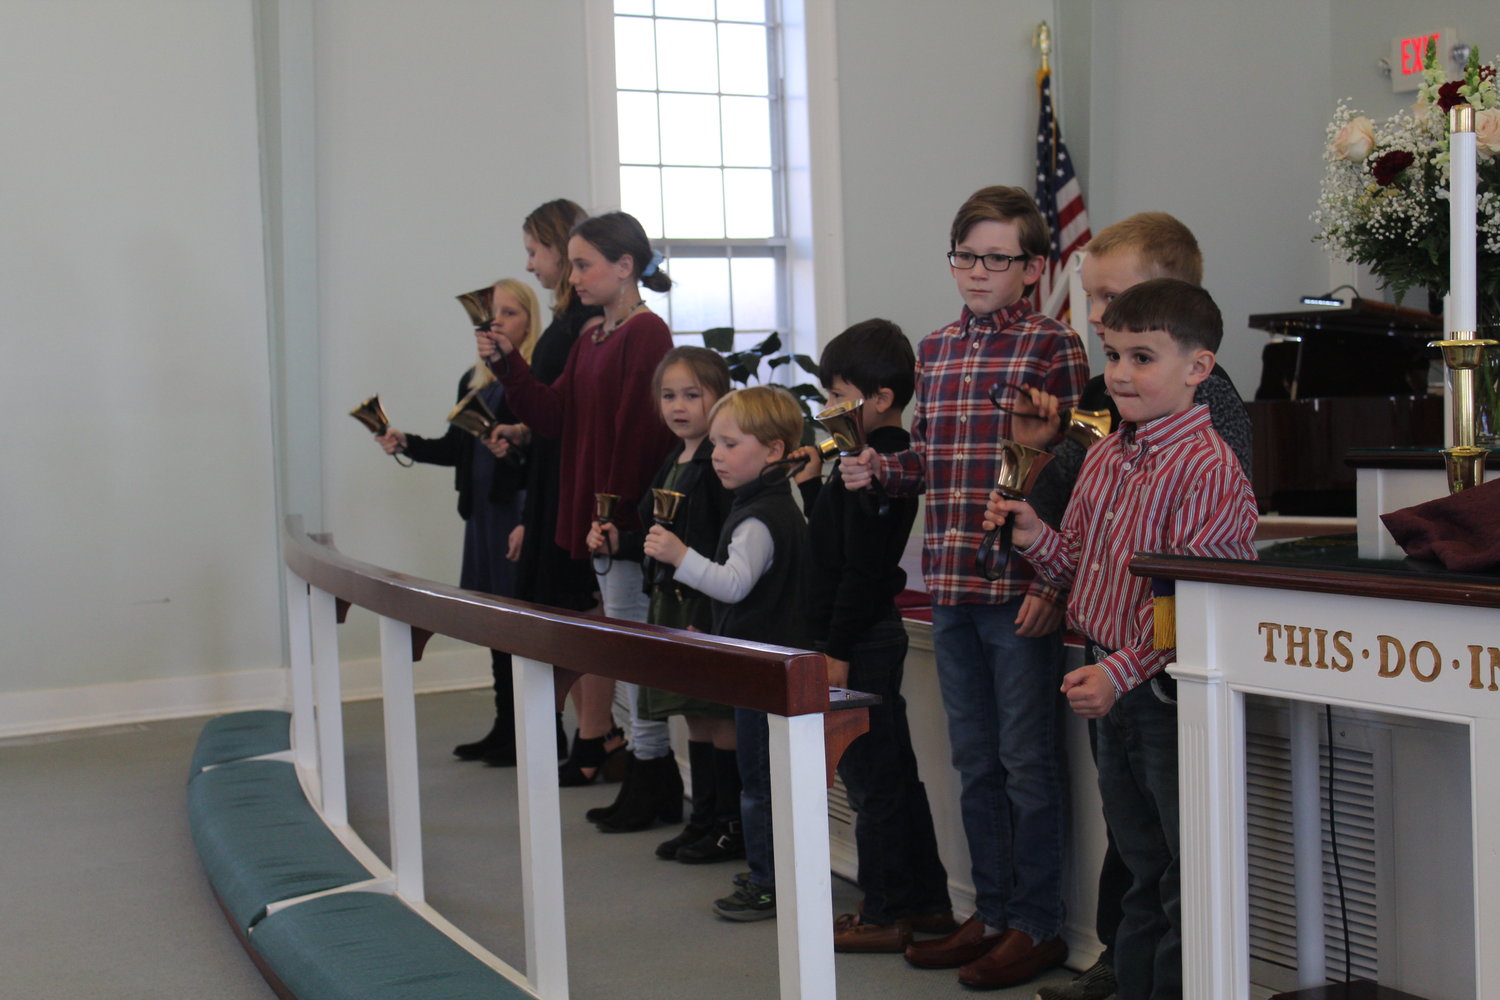 Youth of the Robertsdale United Methodist Church ring bells to open the service celebrating the church’s 100th anniversary.